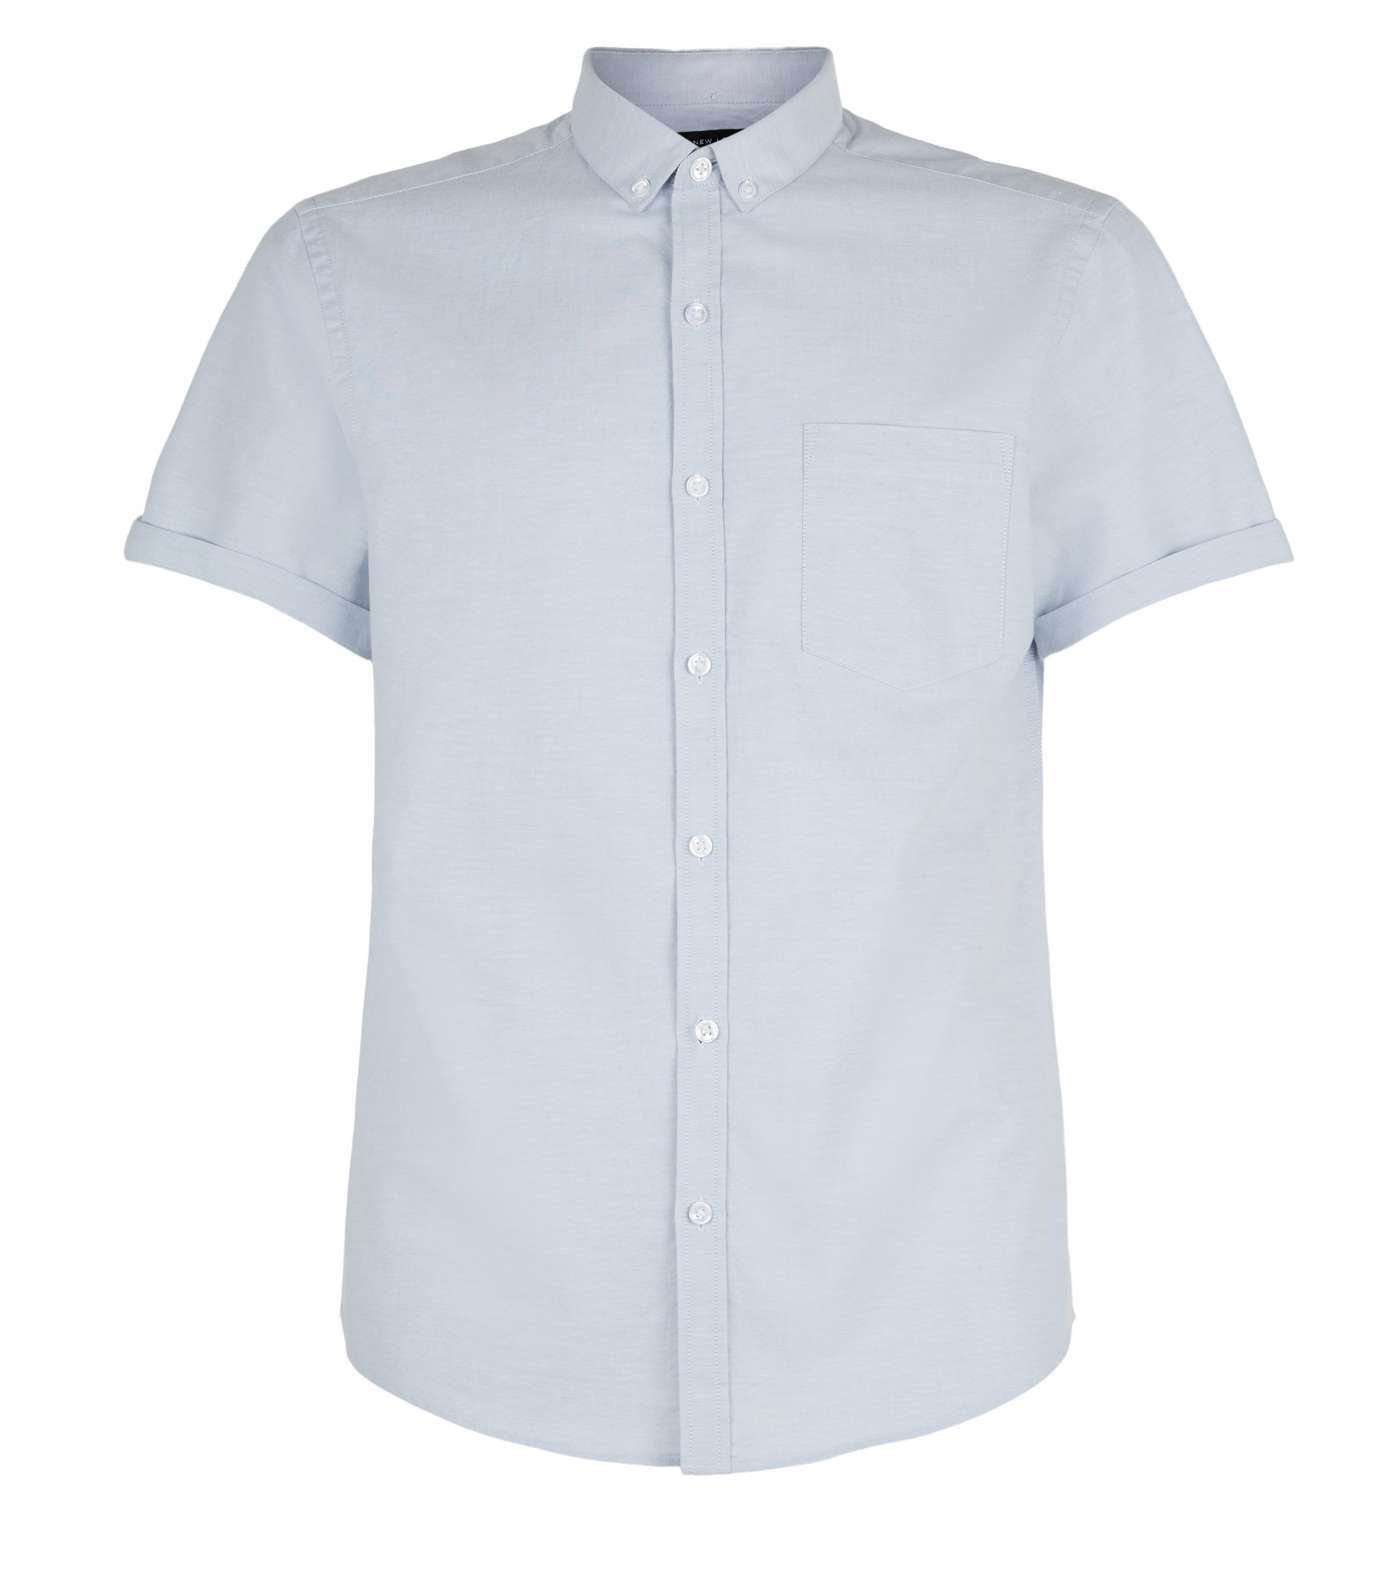 2 Pack Pale Blue and White Oxford Shirts Image 4